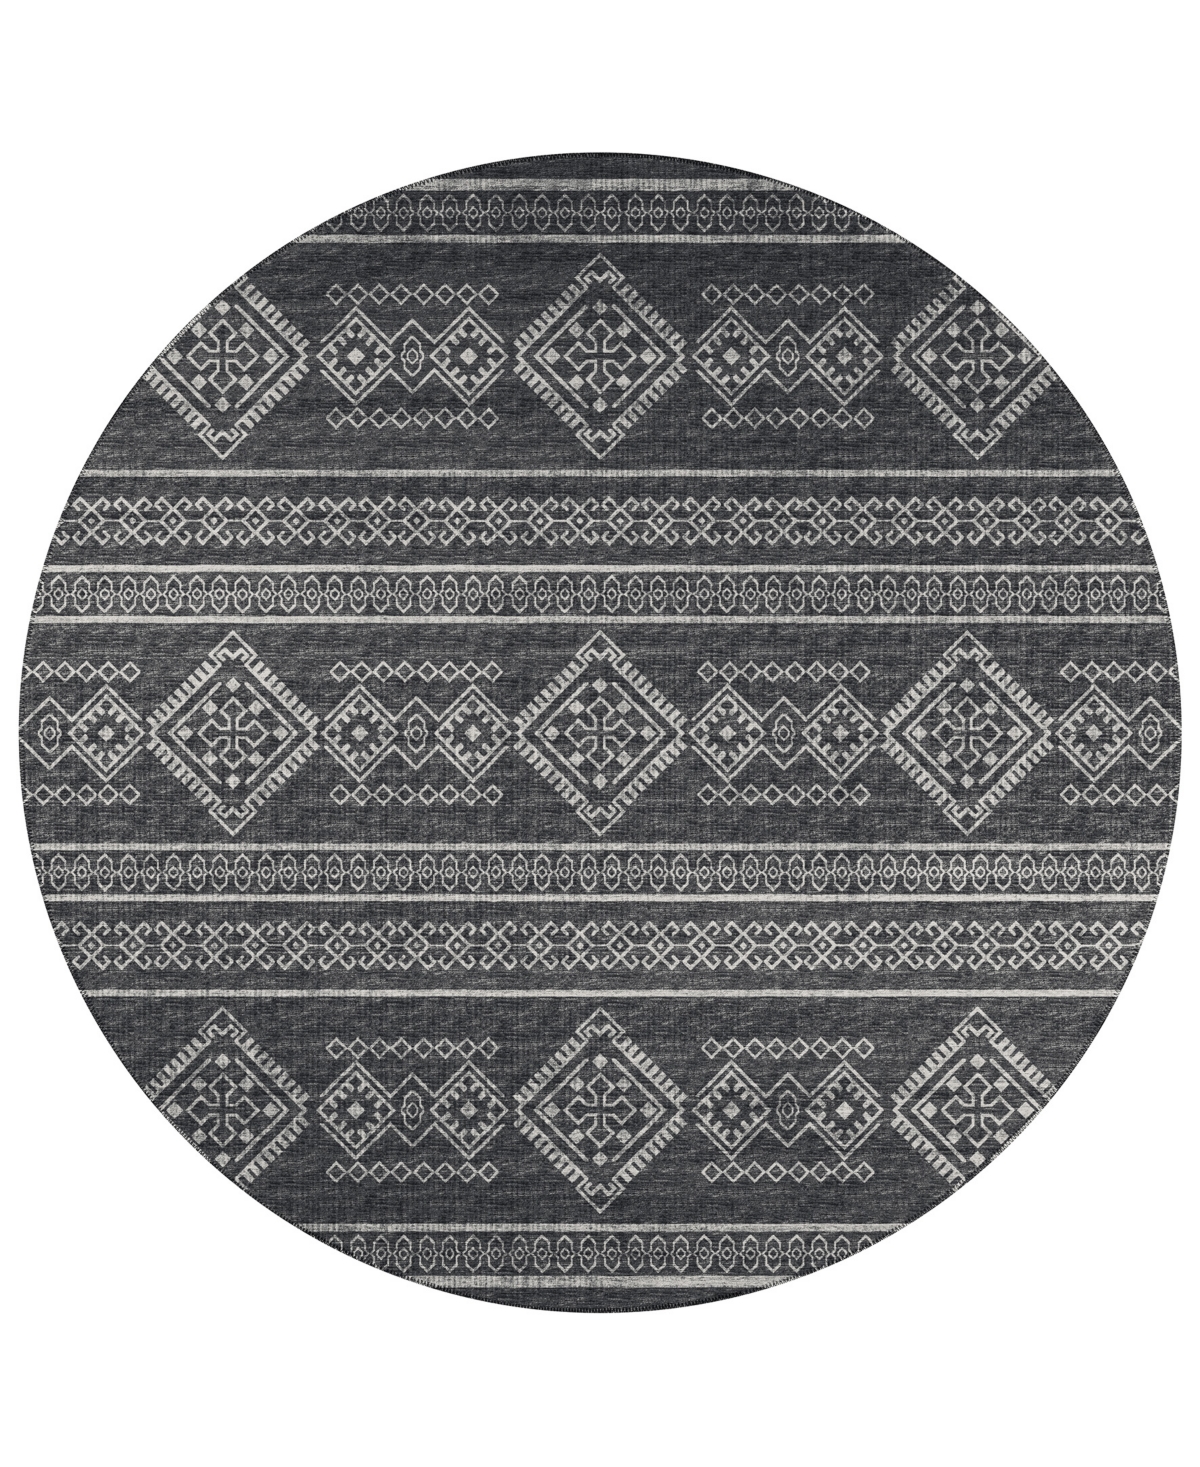 D Style Buttes BTS14 6' x 6' Round Area Rug - Midnight